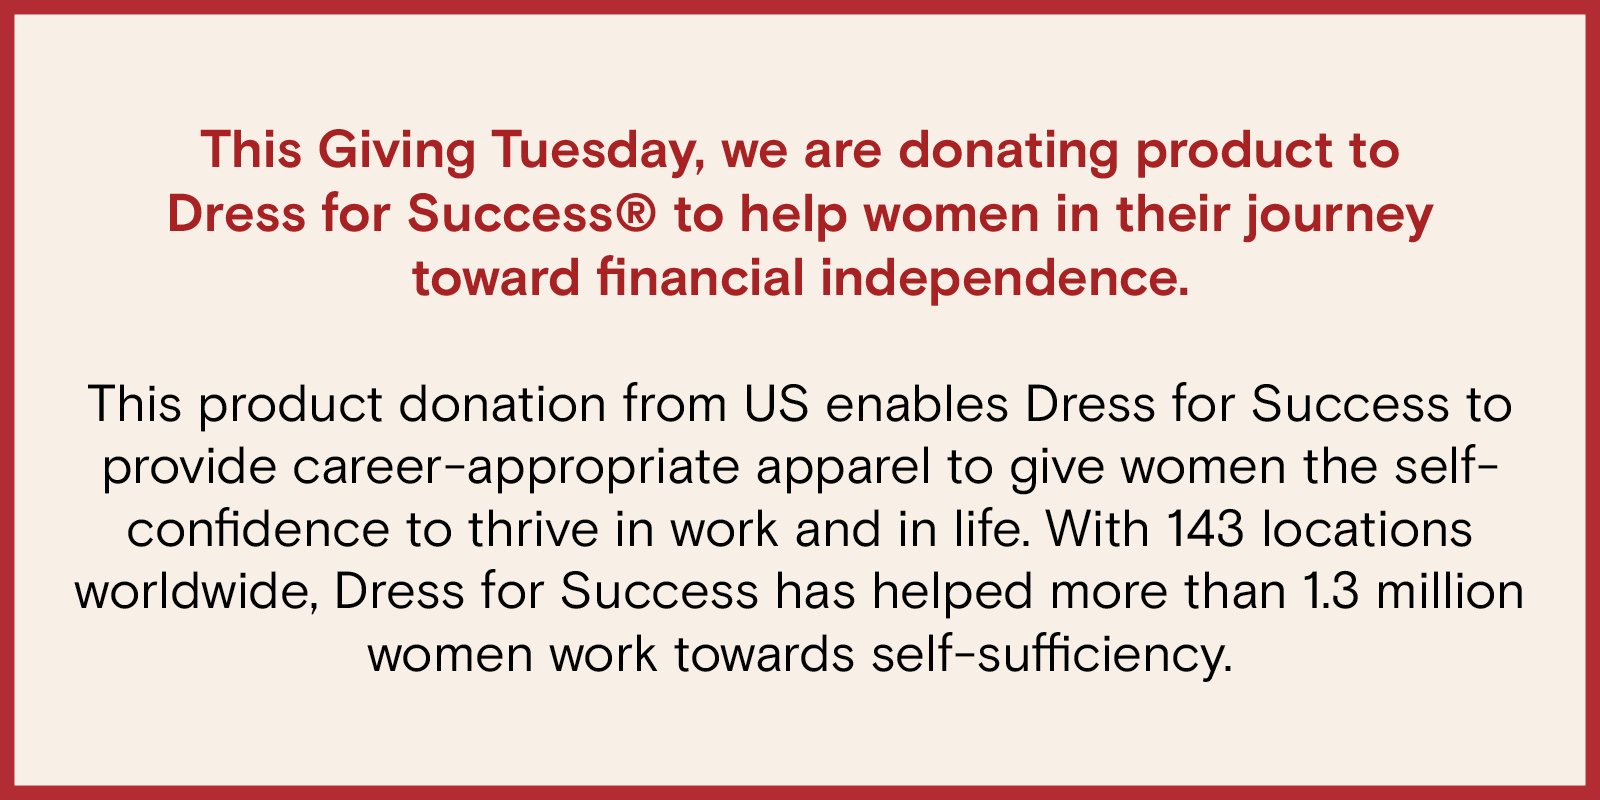 This Giving Tuesday, we are donating product to Dress for Success